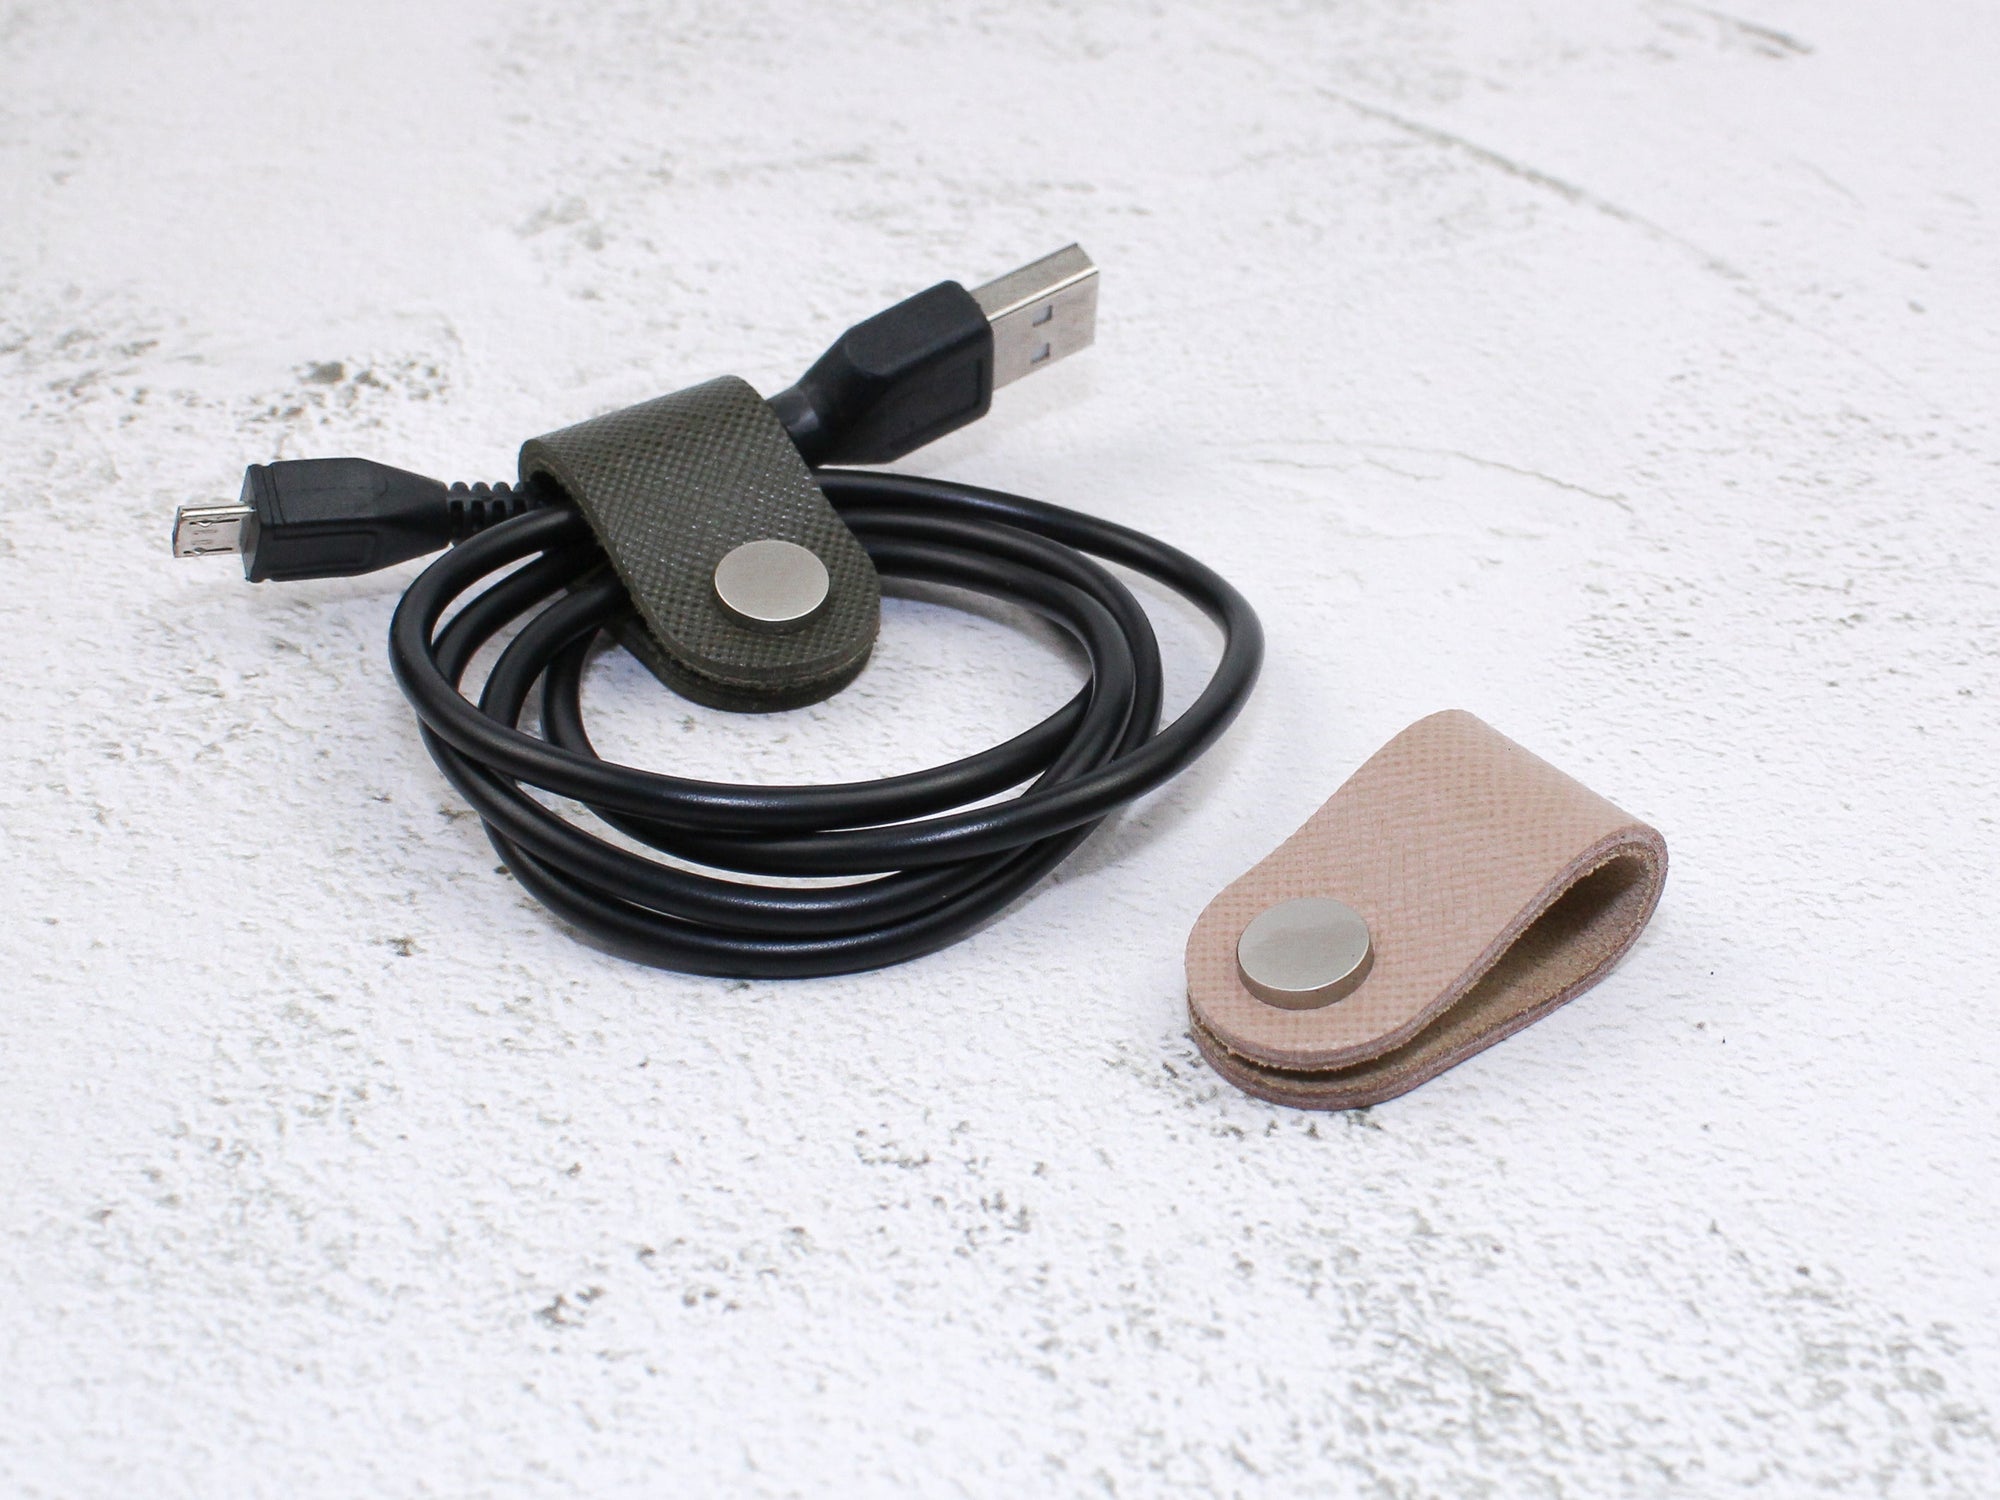 Set of 2 Cord Organiser Wraps | Cable Tidies | Olive & Nude Saffiano Leather with Suede